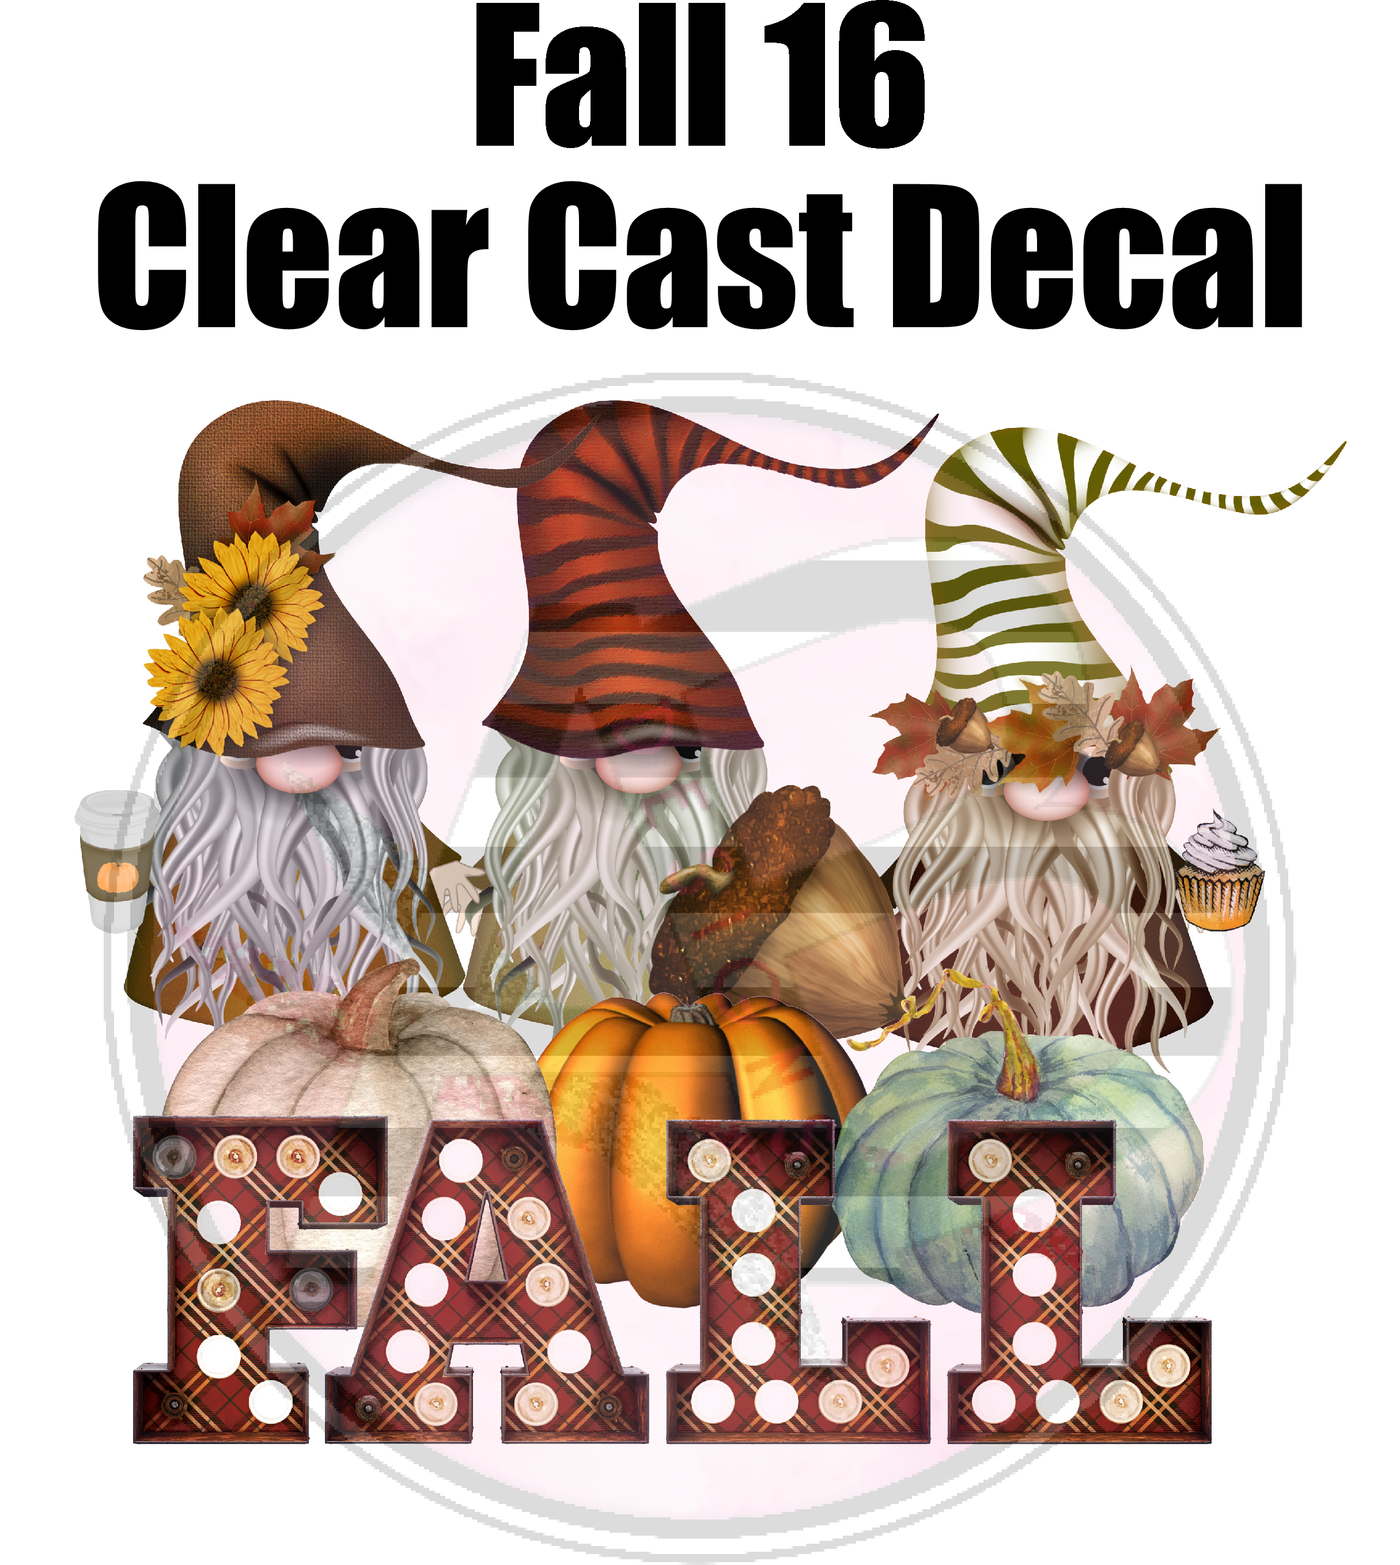 Fall 16 - Clear Cast Decal